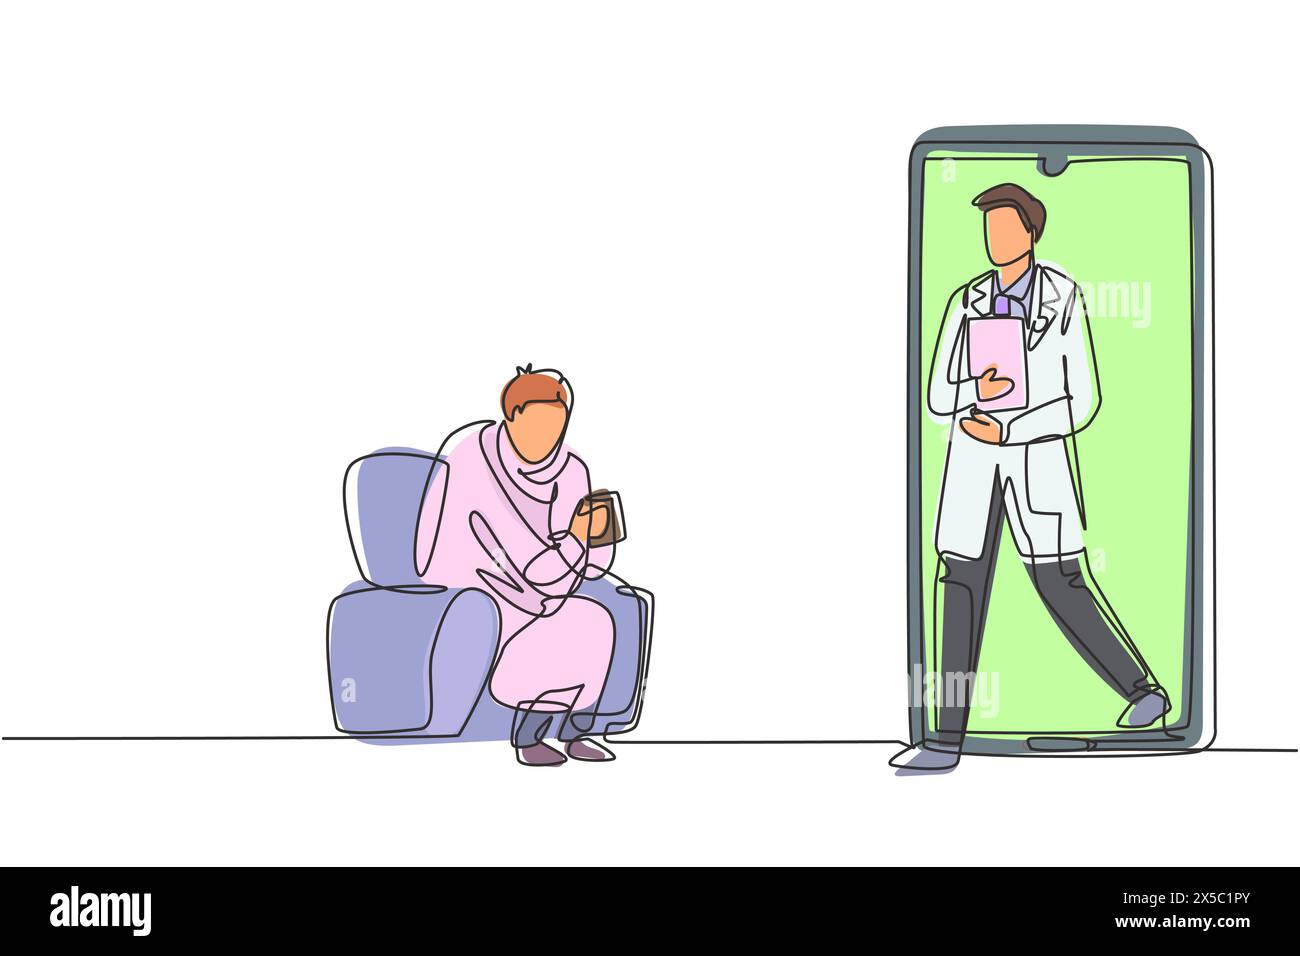 Single one line drawing male patient sitting curled up on sofa, using blanket, holding mug and there is male doctor walking out of smartphone, holding Stock Vector